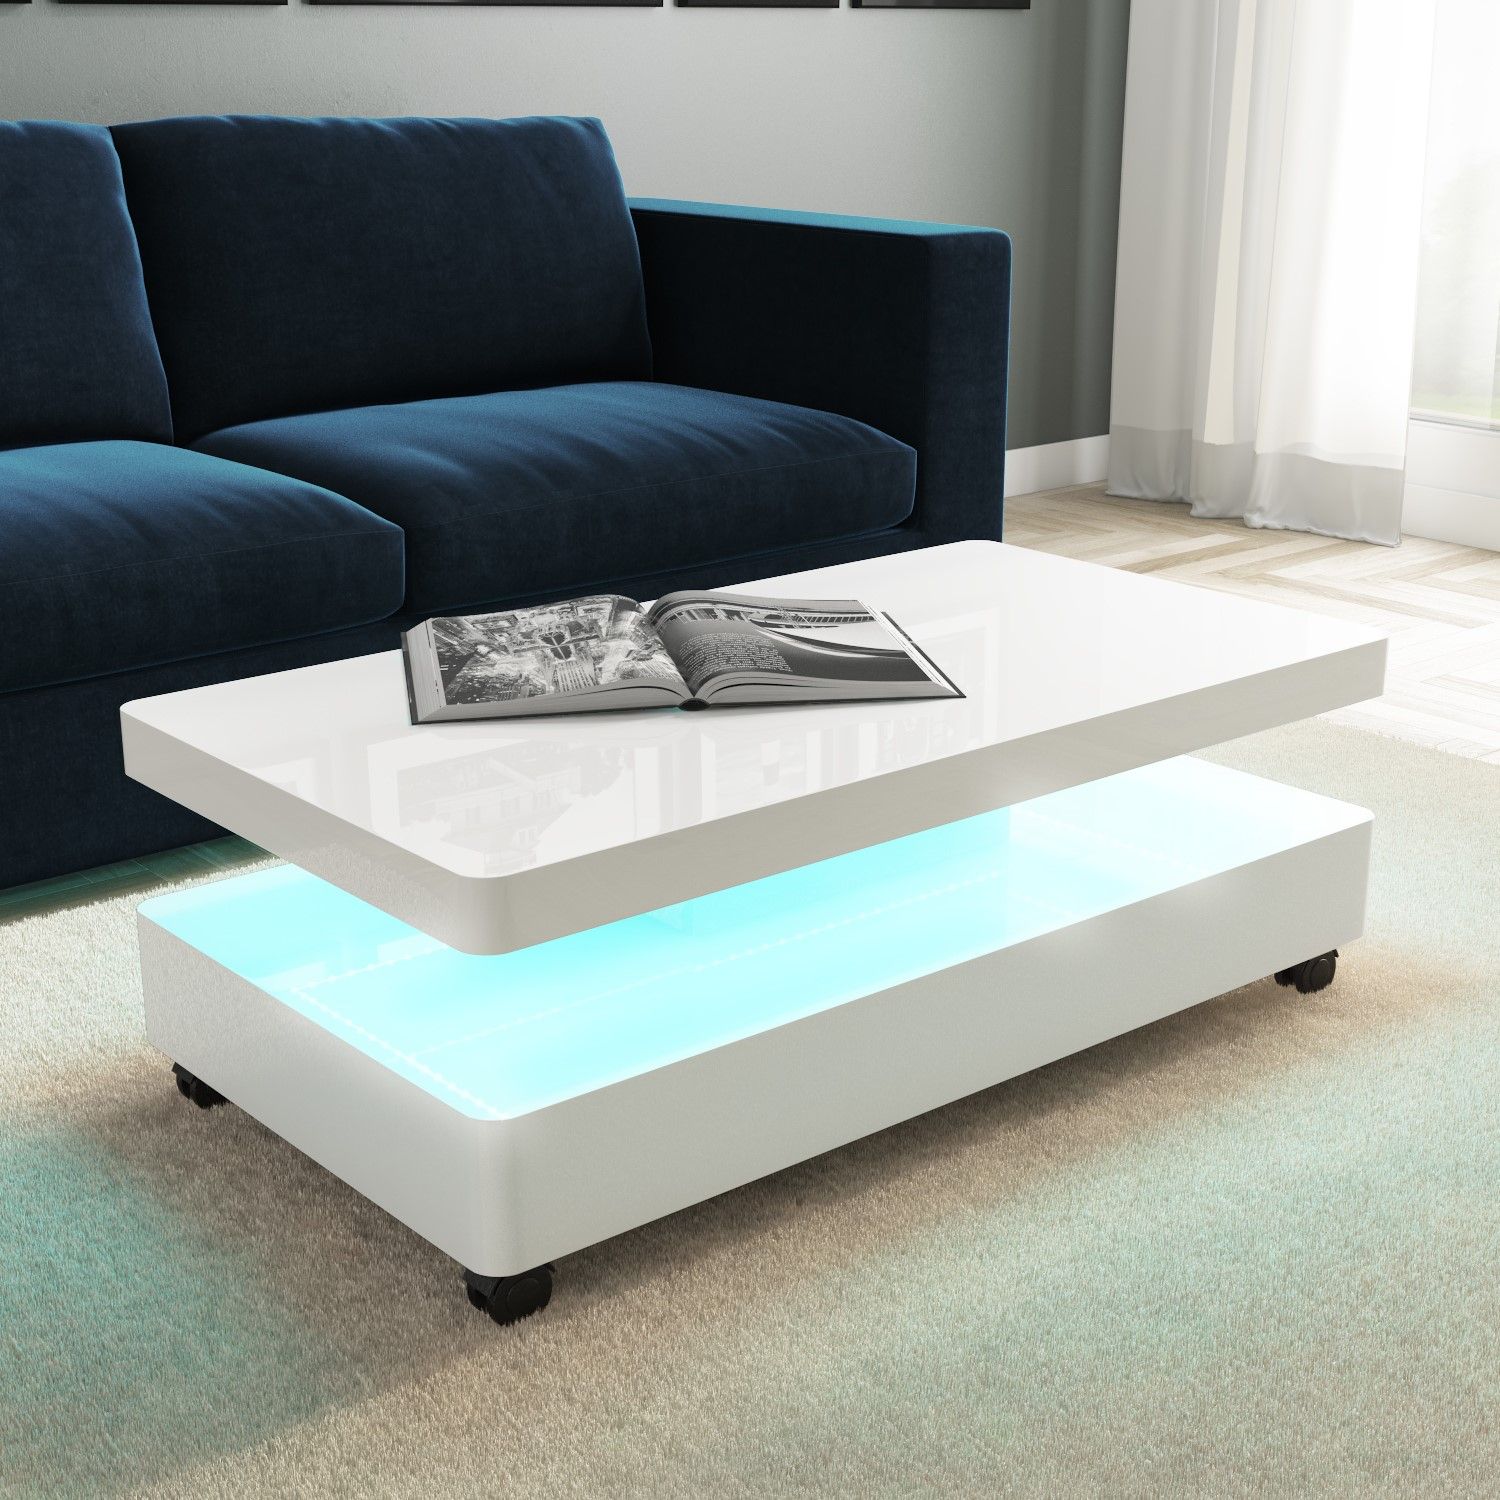 High Gloss White Coffee Table With Led Lighting 5060388562168 | Ebay With Regard To Coffee Tables With Led Lights (Gallery 4 of 20)